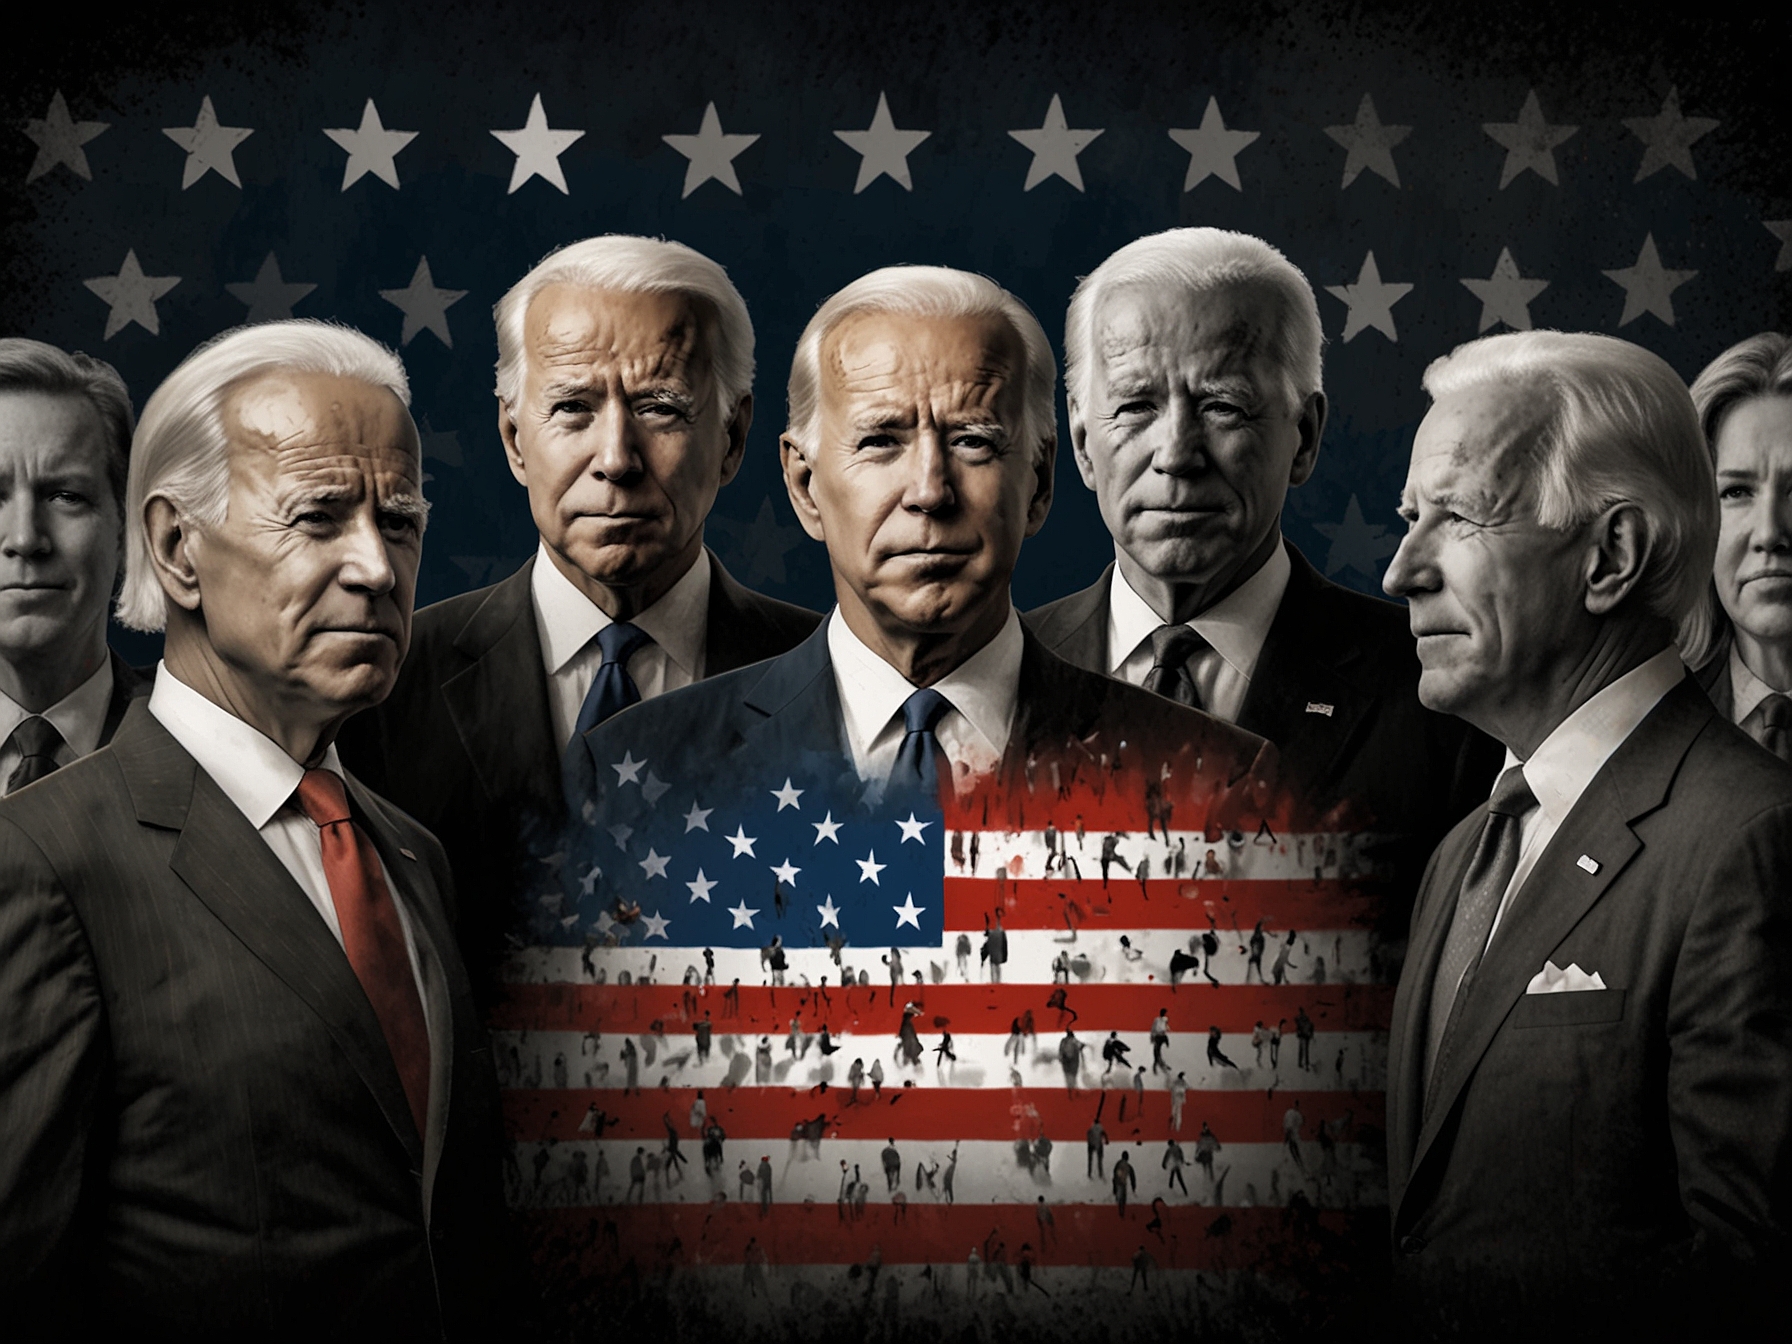 A graphic depicting a divided public, with figures representing different political views, highlighting the polarized electorate and varied perceptions of Biden's competence.